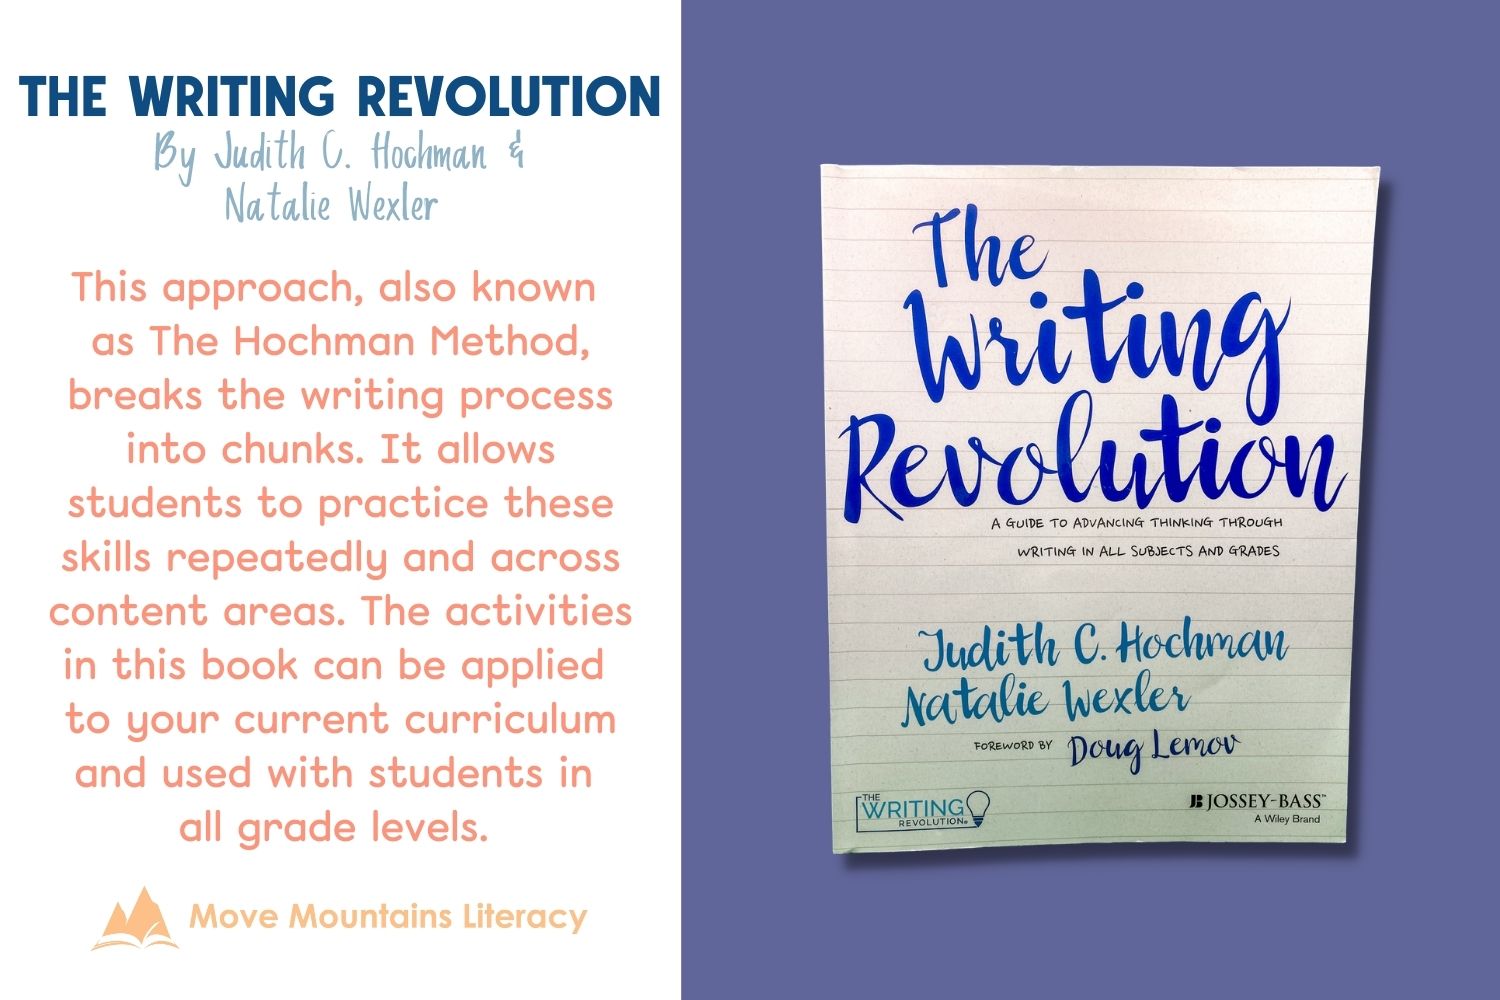 The Book - The Writing Revolution